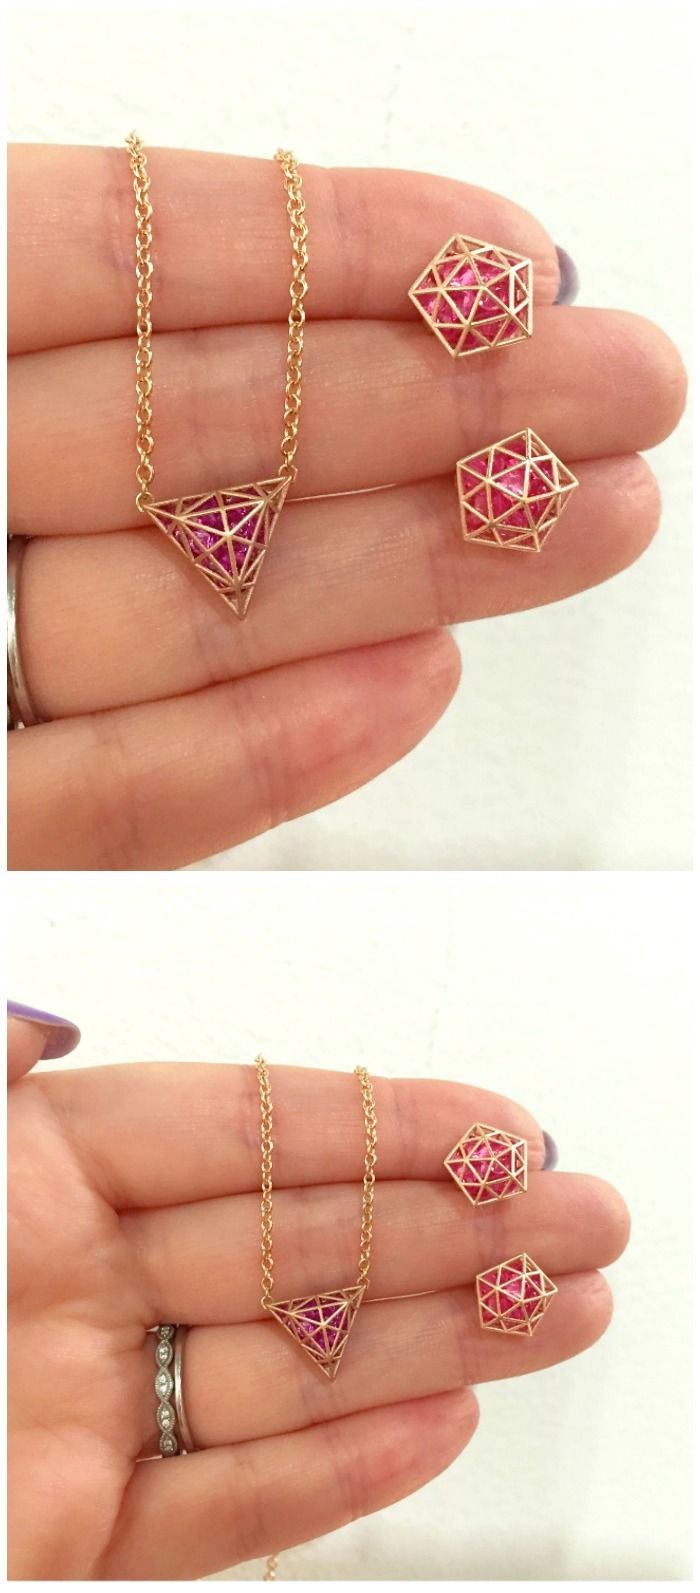 Pretty little pieces by Roule and Co. I love the look of these caged gemstones.